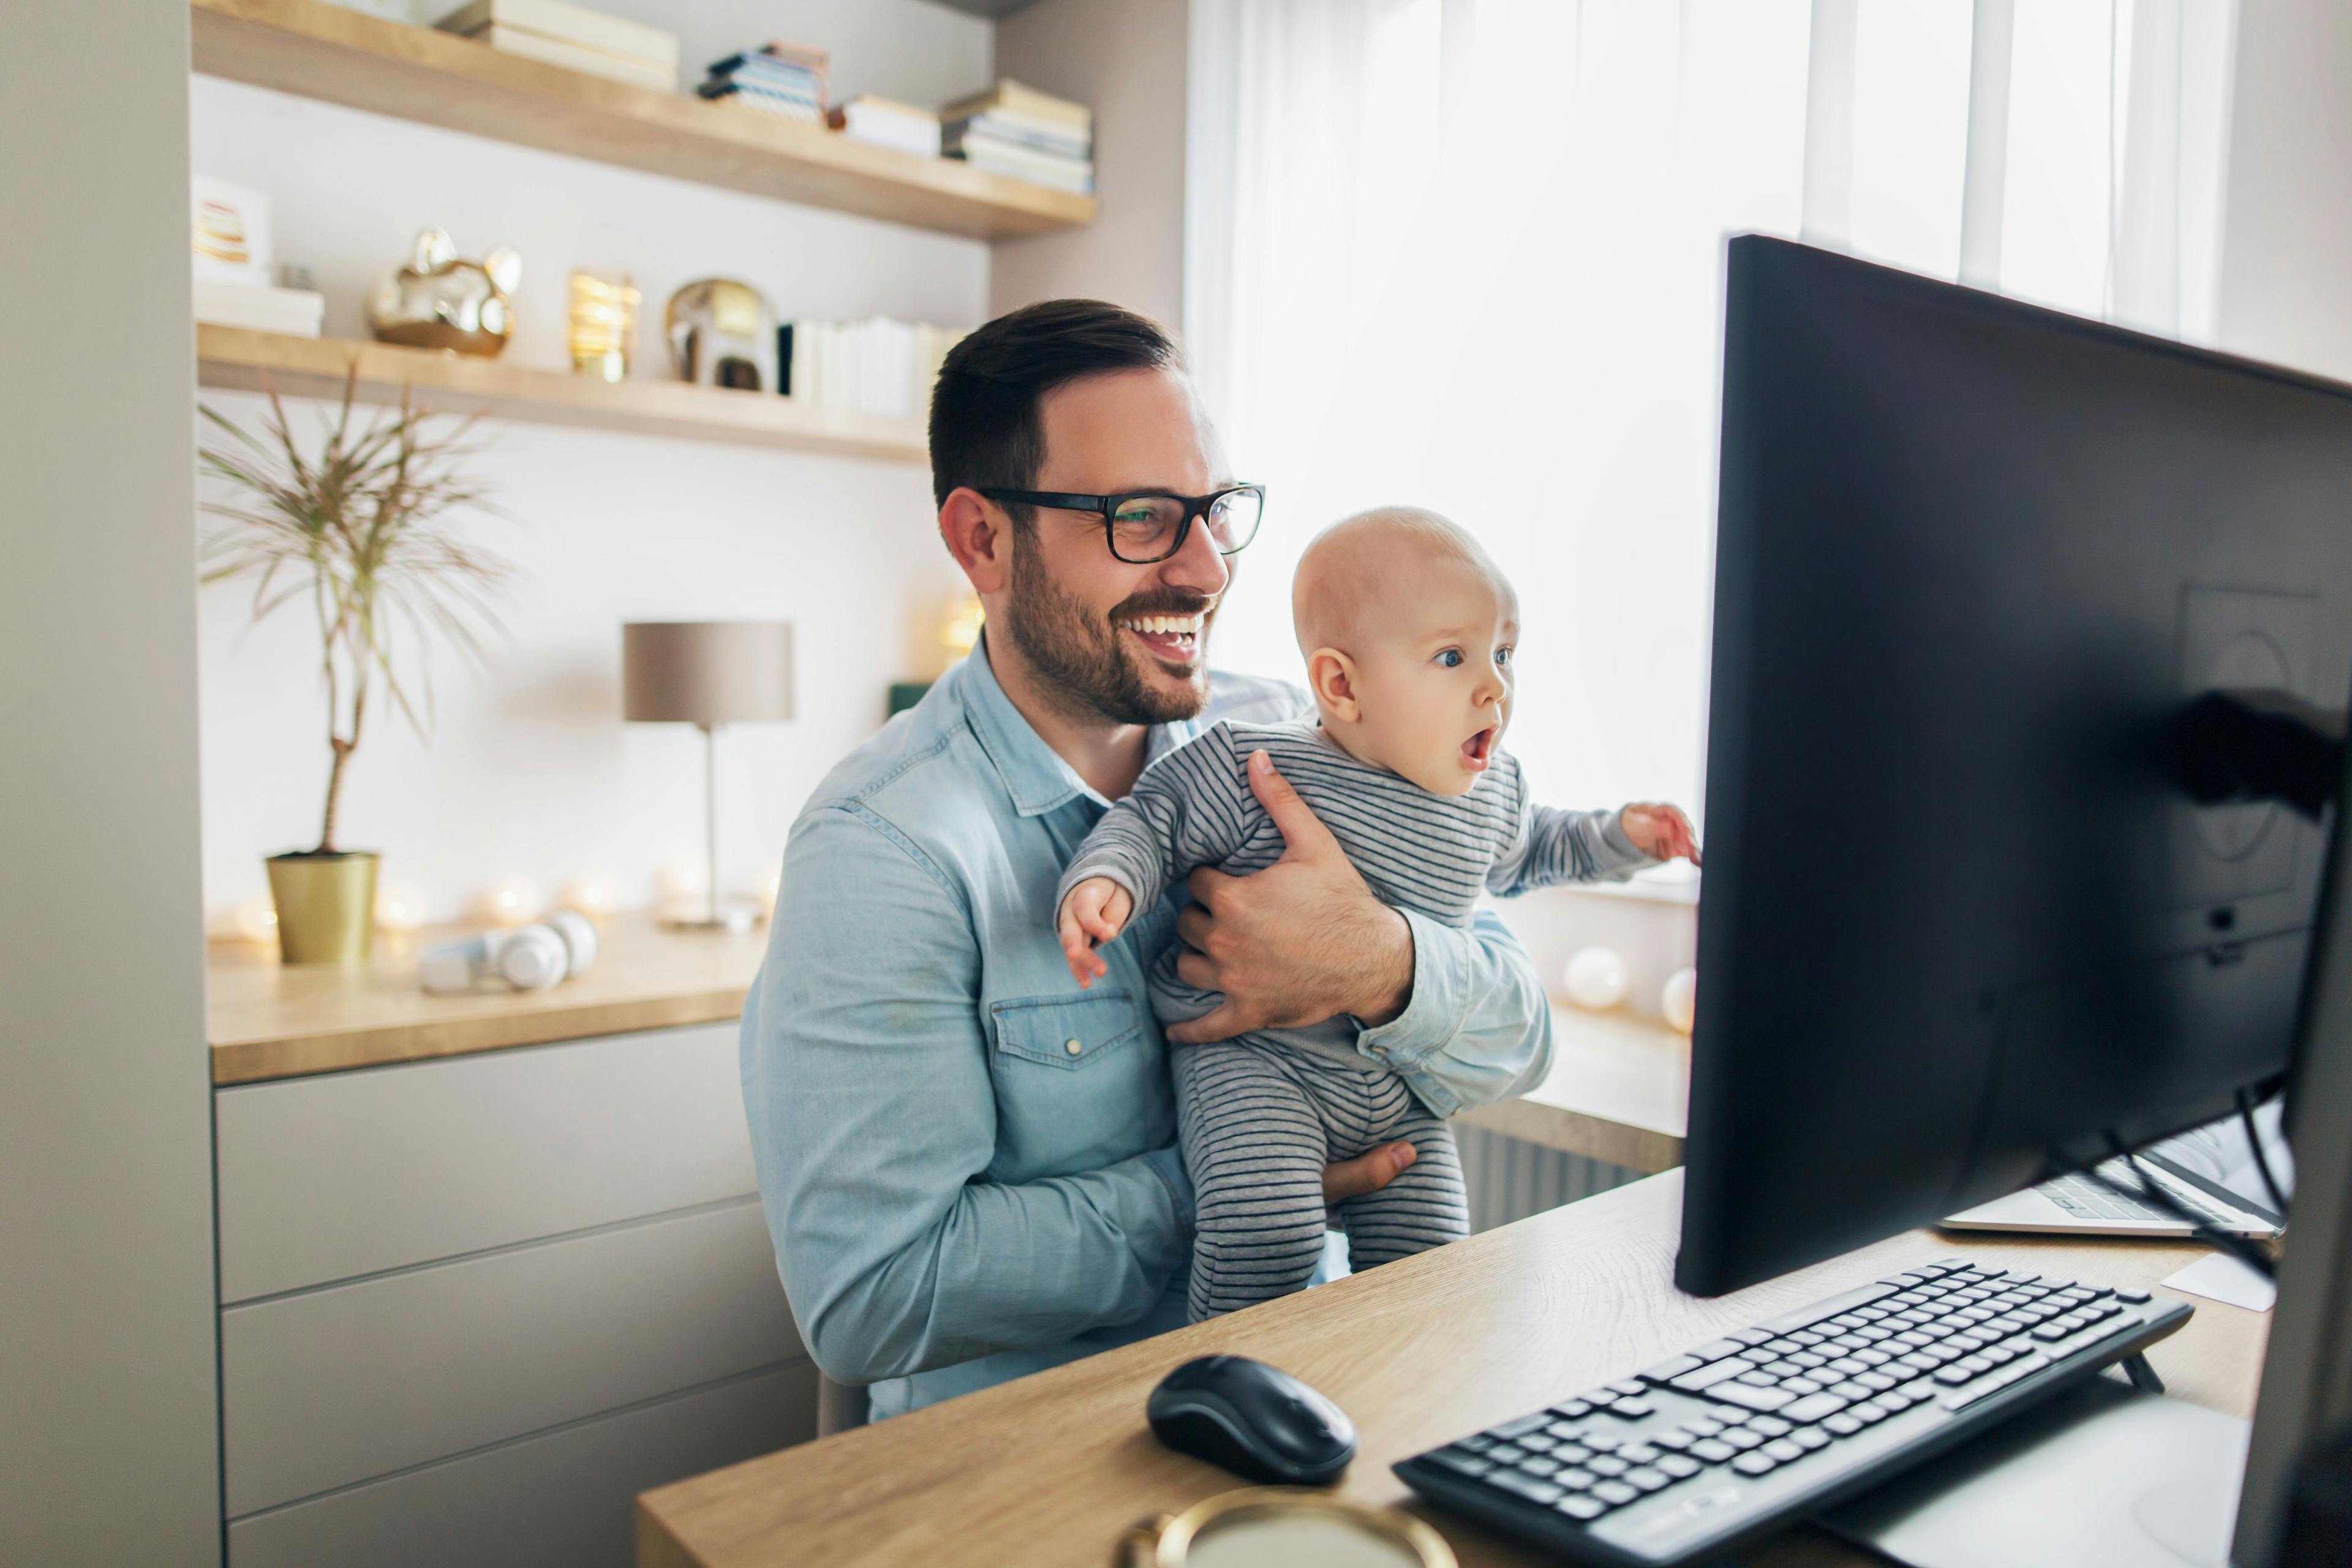 Demystifying digital marketing article header - A man holding his child in front of a monitor